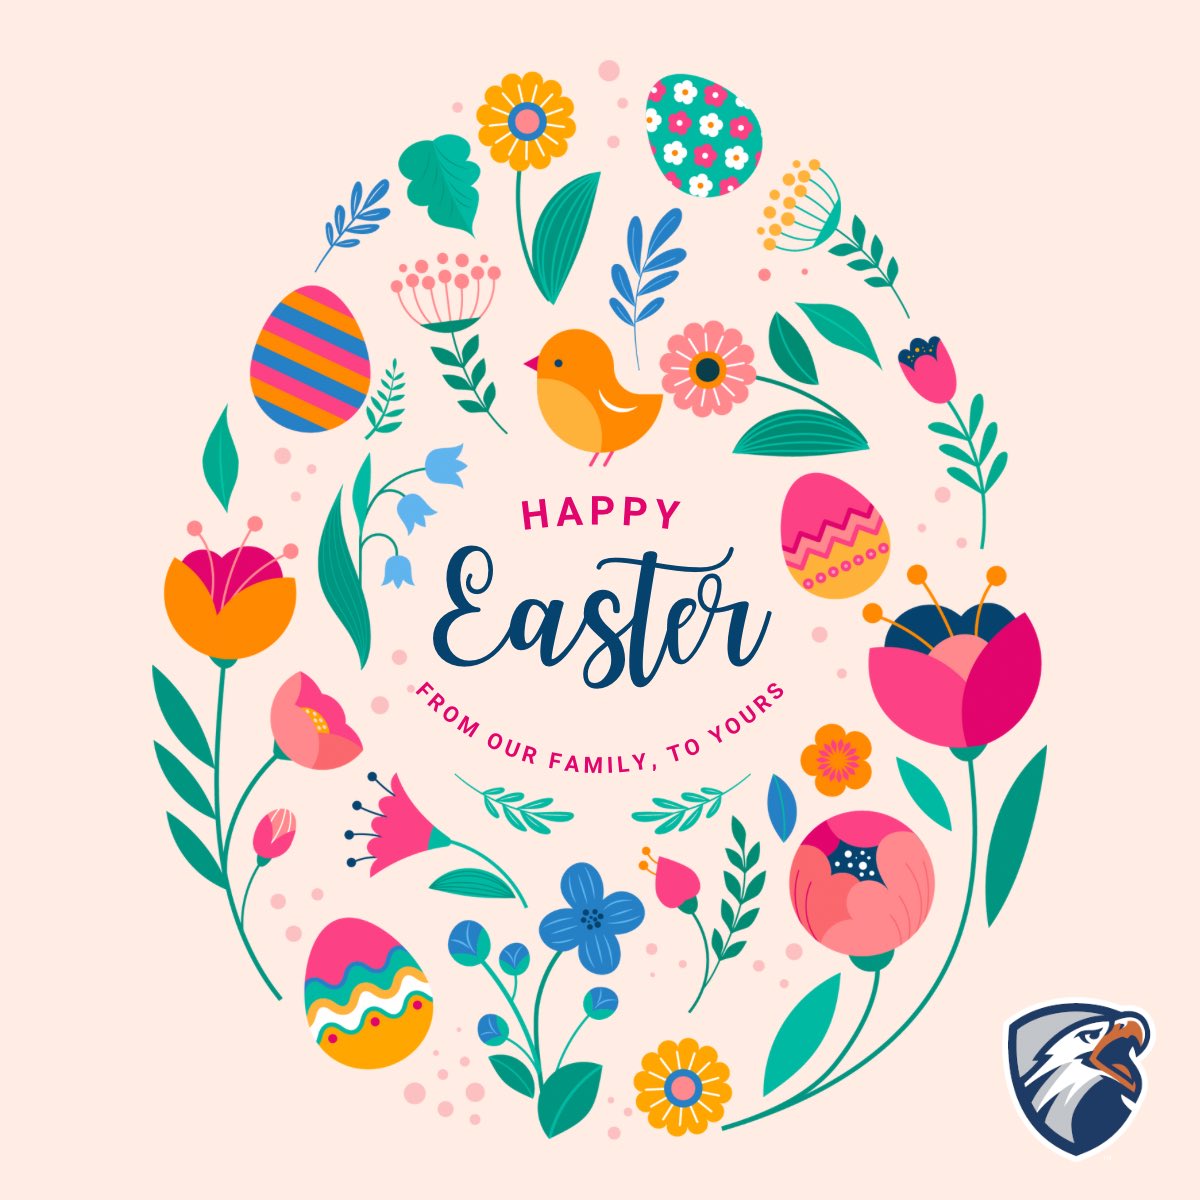 Happy Easter! From our family, to yours!